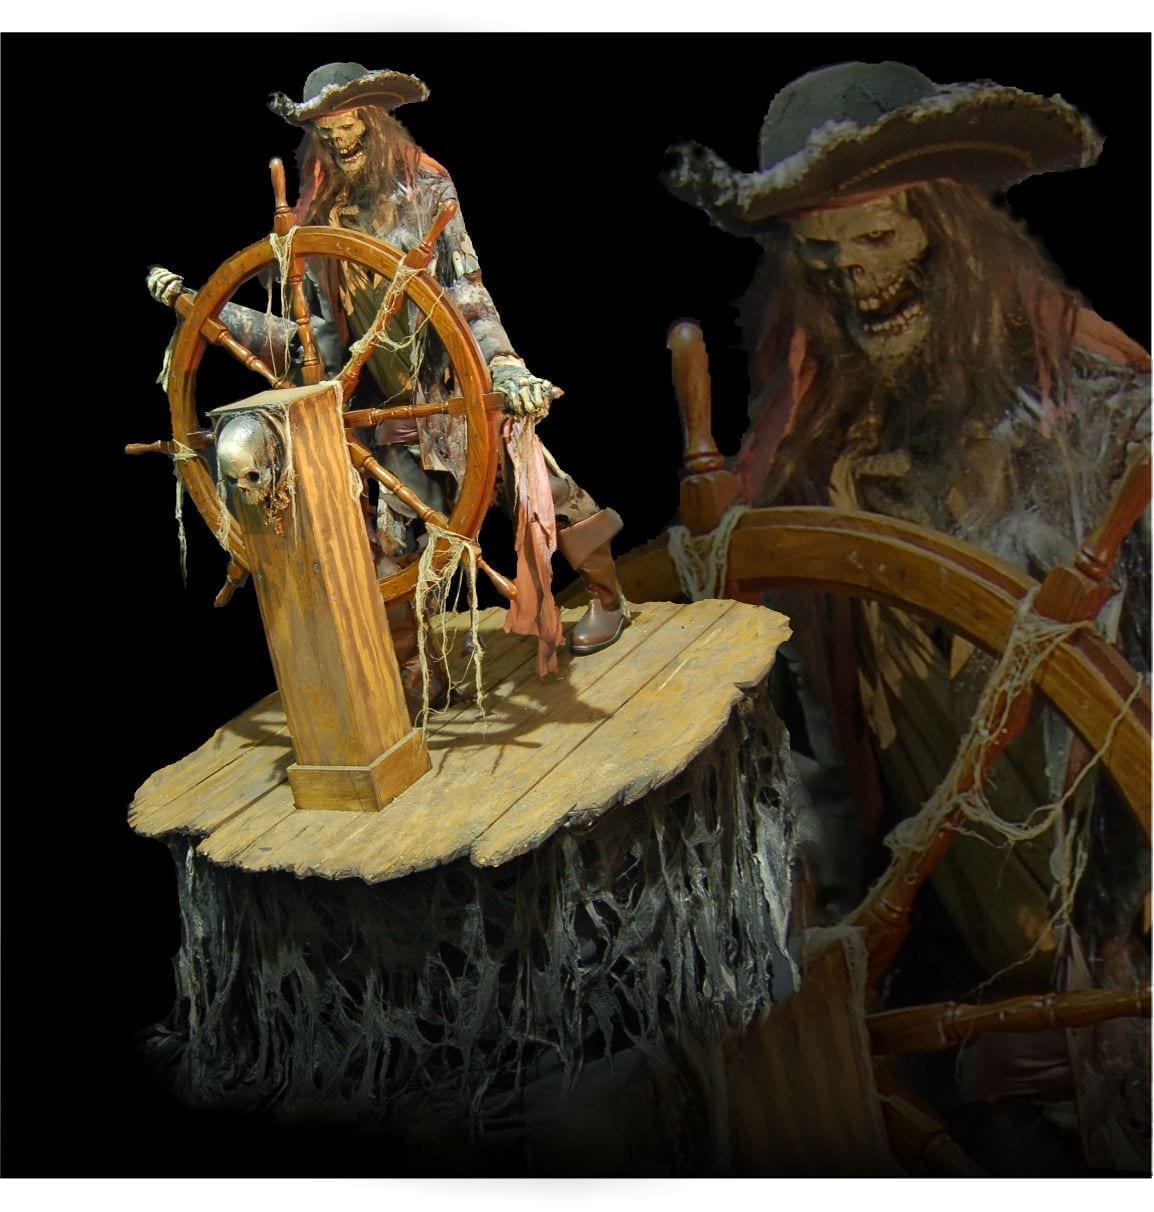 PIRWHL- Pirate Captain at Wheel ⋆ Scare Factory